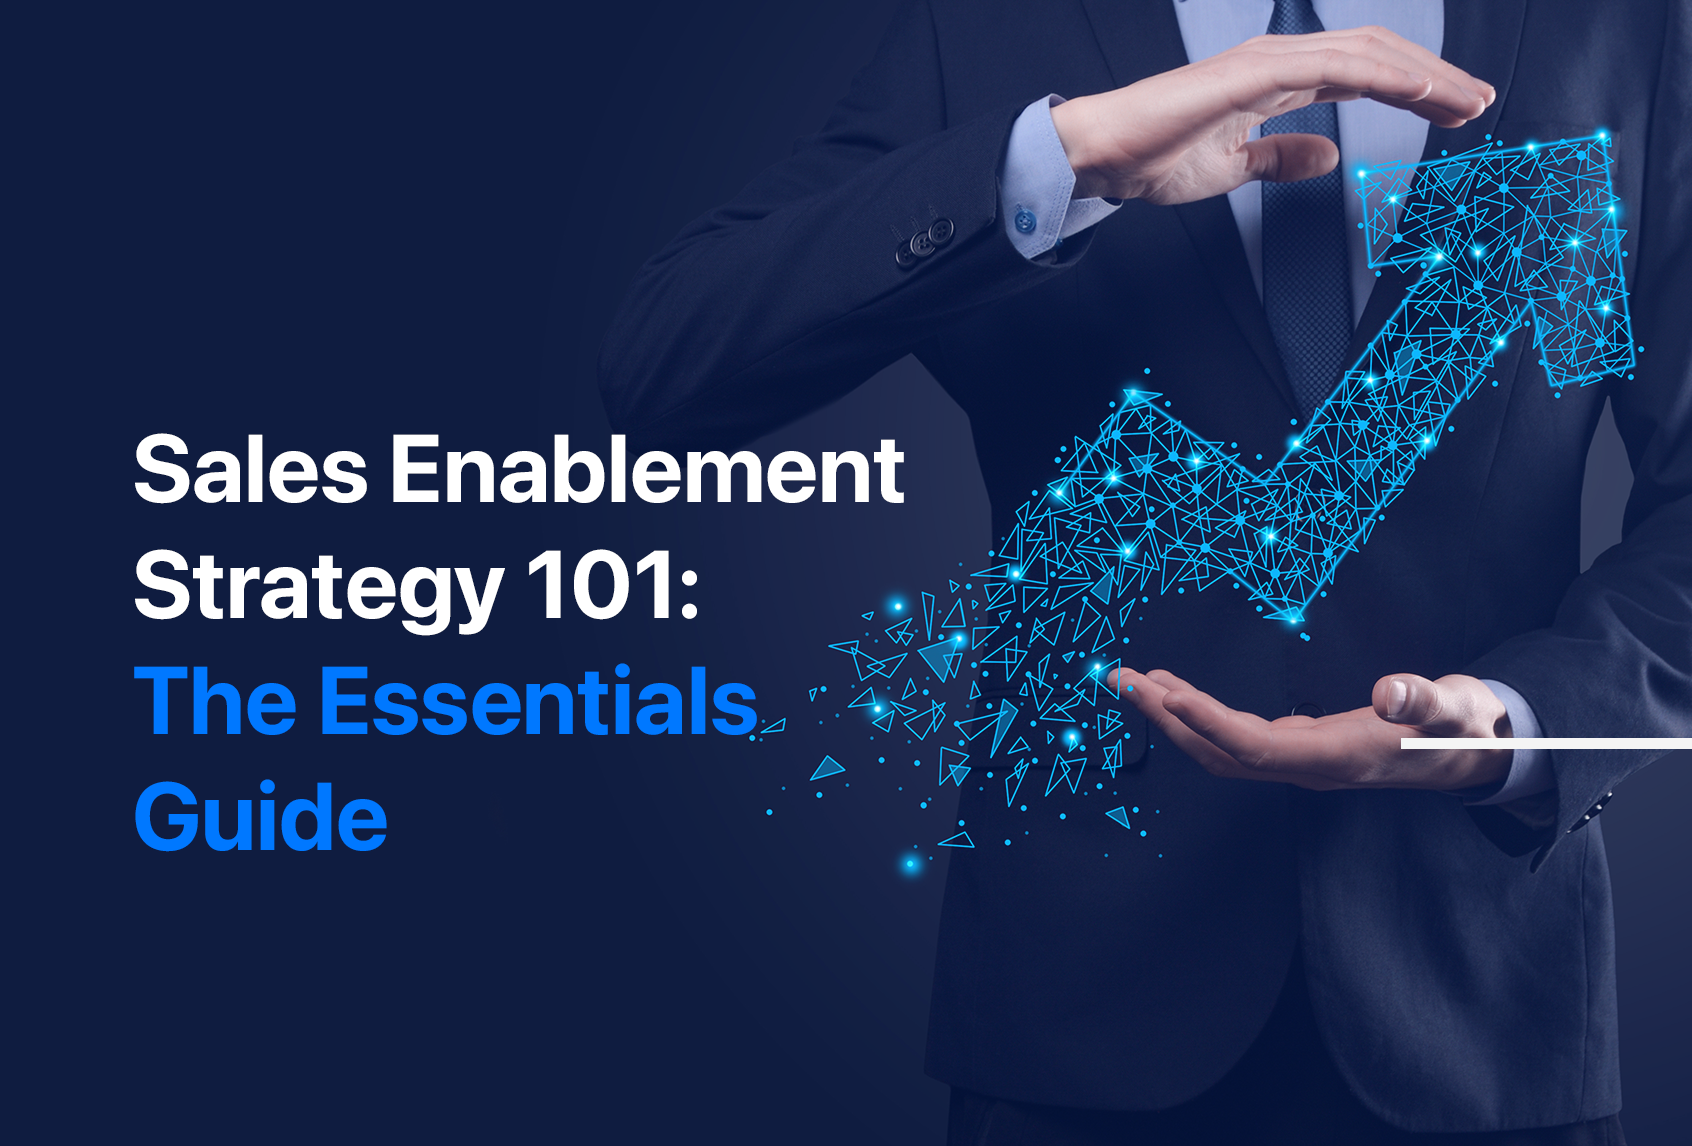 Sales Enablement Strategy 101: The Essentials Guide